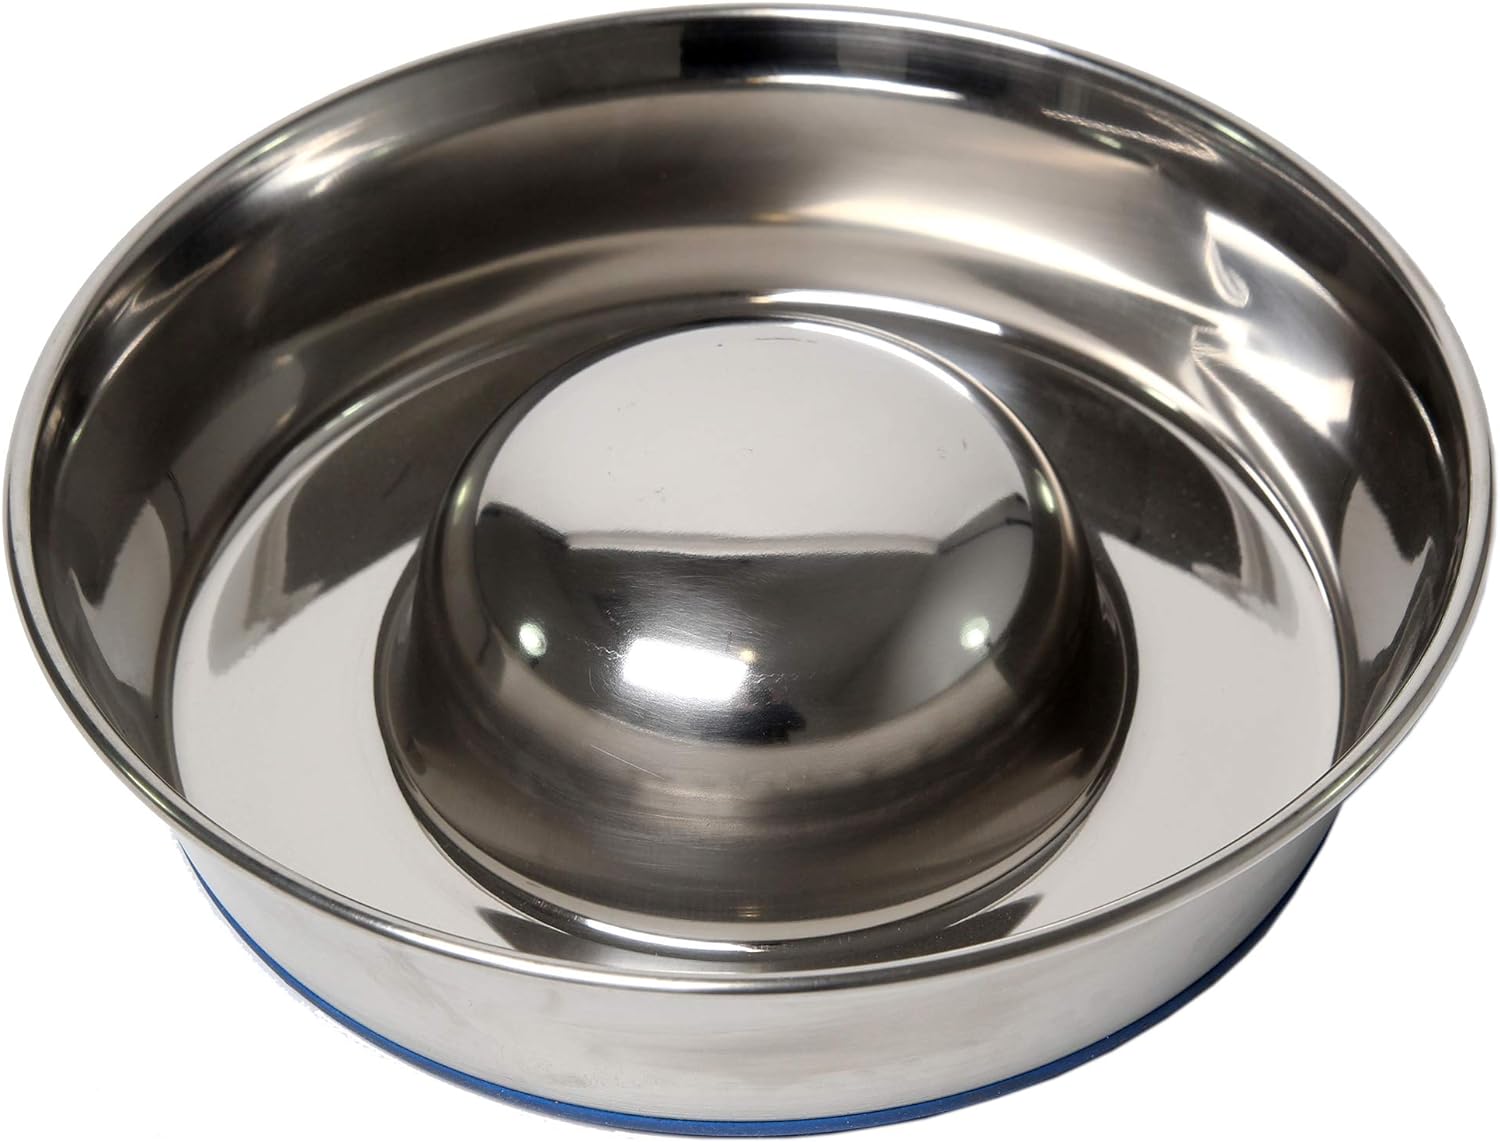 Slow Feed Stainless Steel Dog Bowl